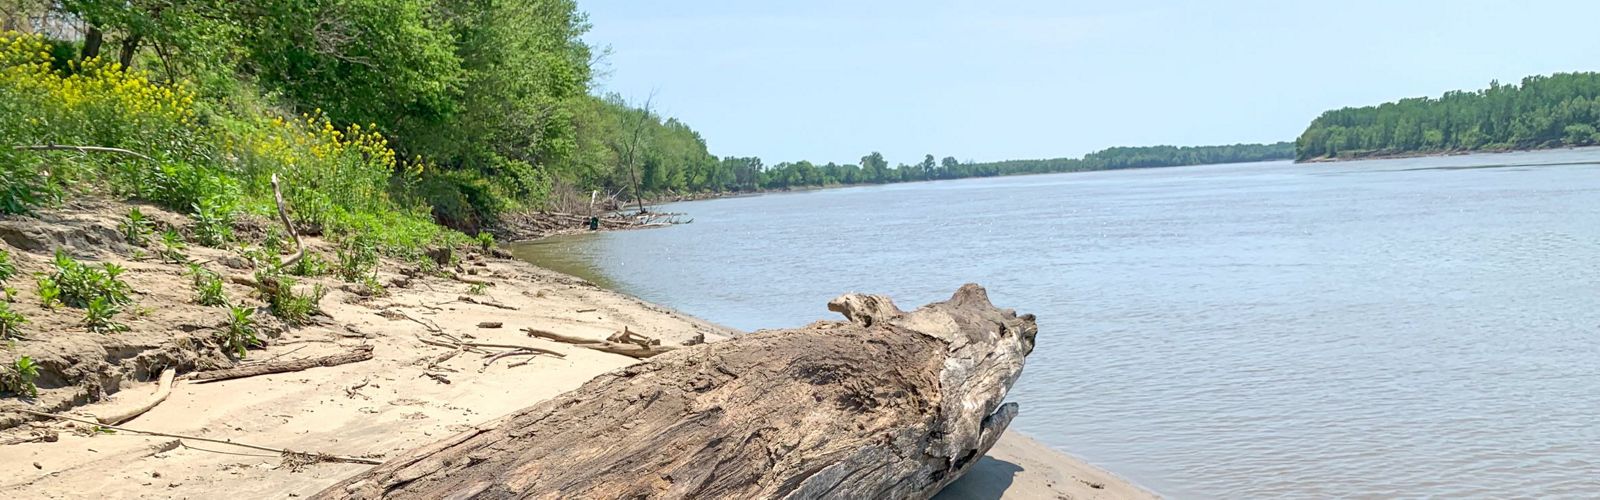 A log laying on a sandy beach along a wide river with forests along its banks. 